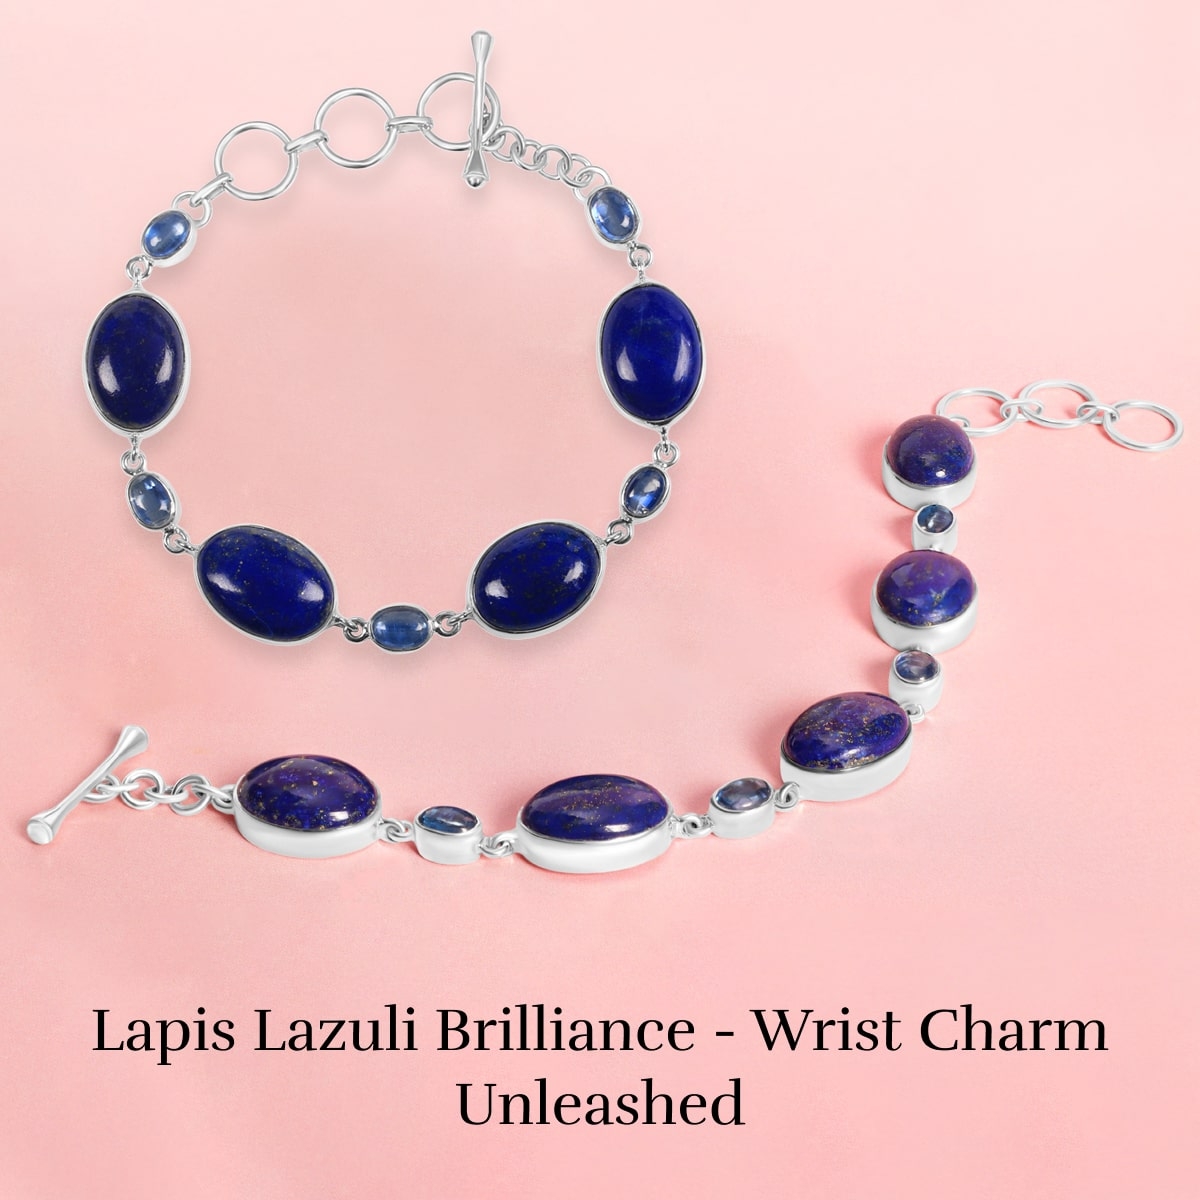 Buy SOLINFOR 60th Birthday Gifts for Women - Lapis Lazuli Beads Bracelet -  60 Years Old Jewelry Gift Idea for Her at Amazon.in